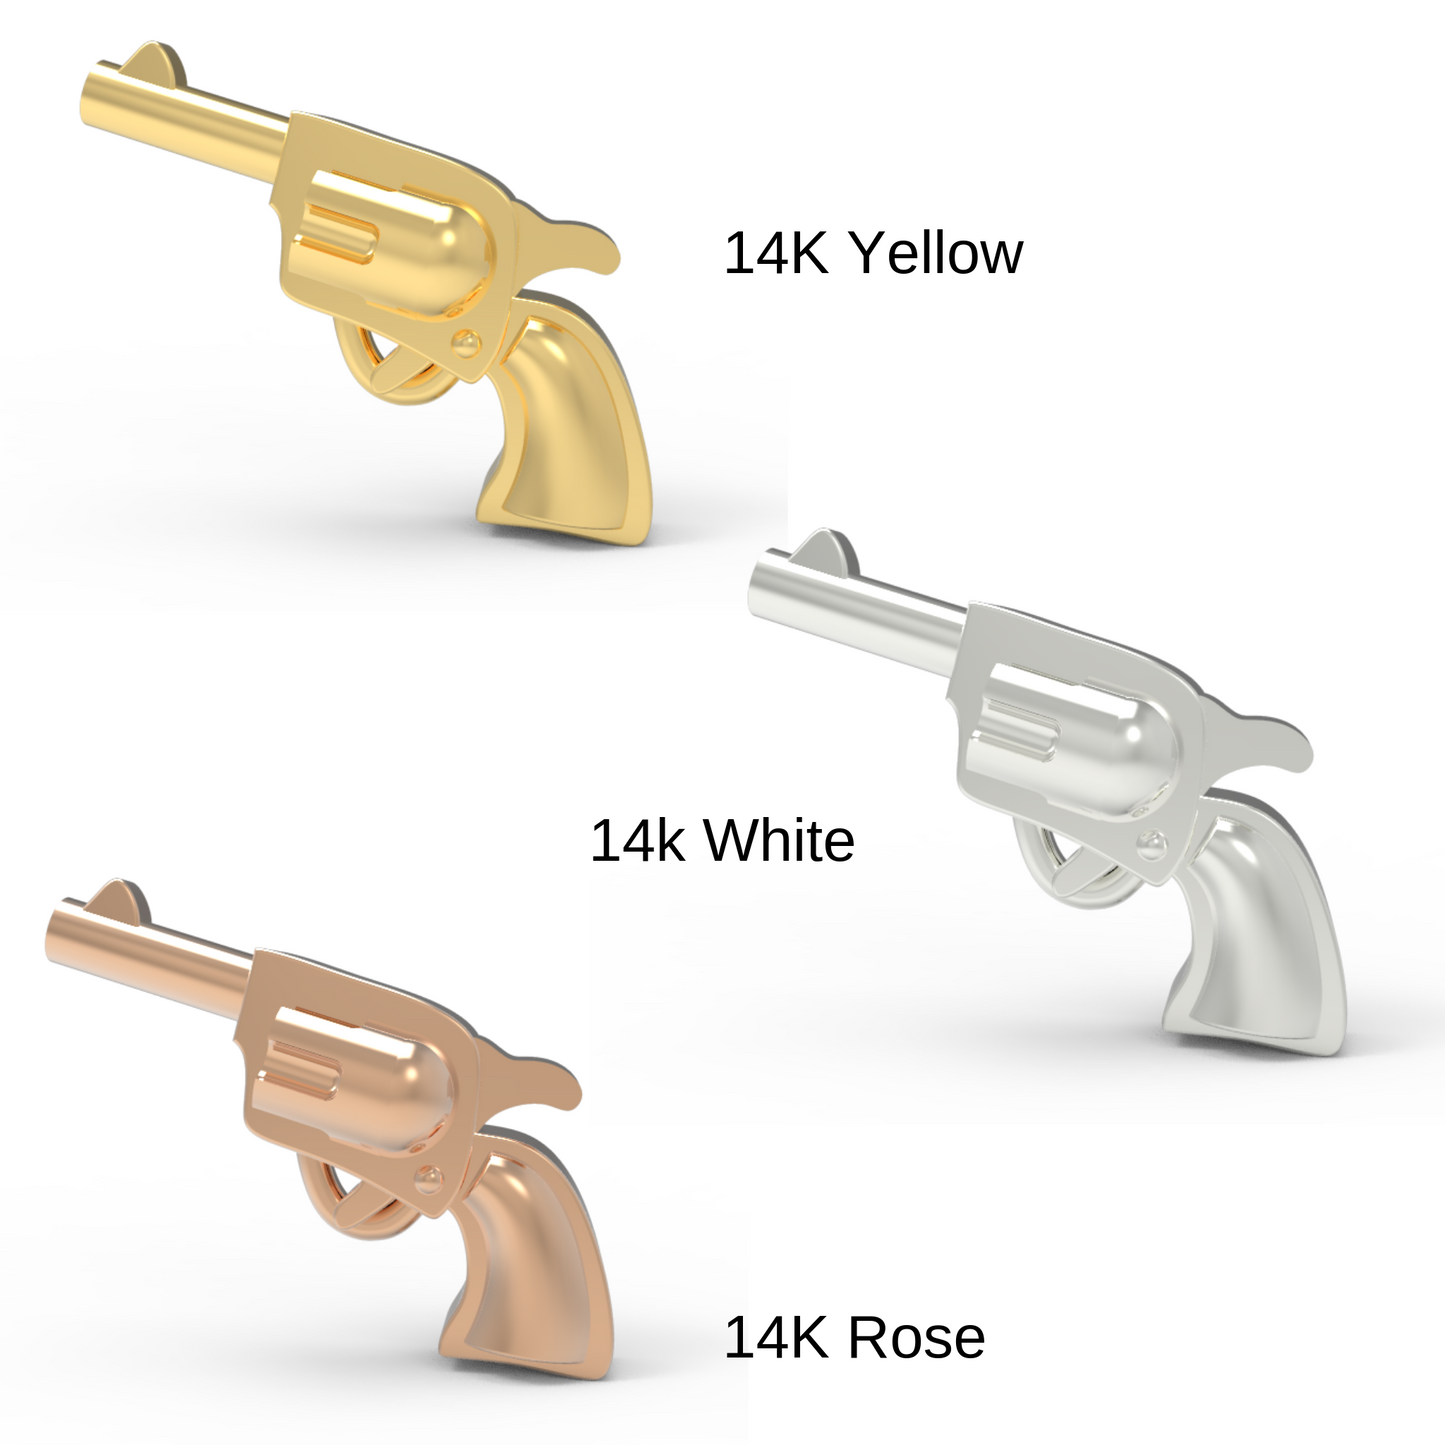 pistol stud earrings in 14k yellow, white and rose gold